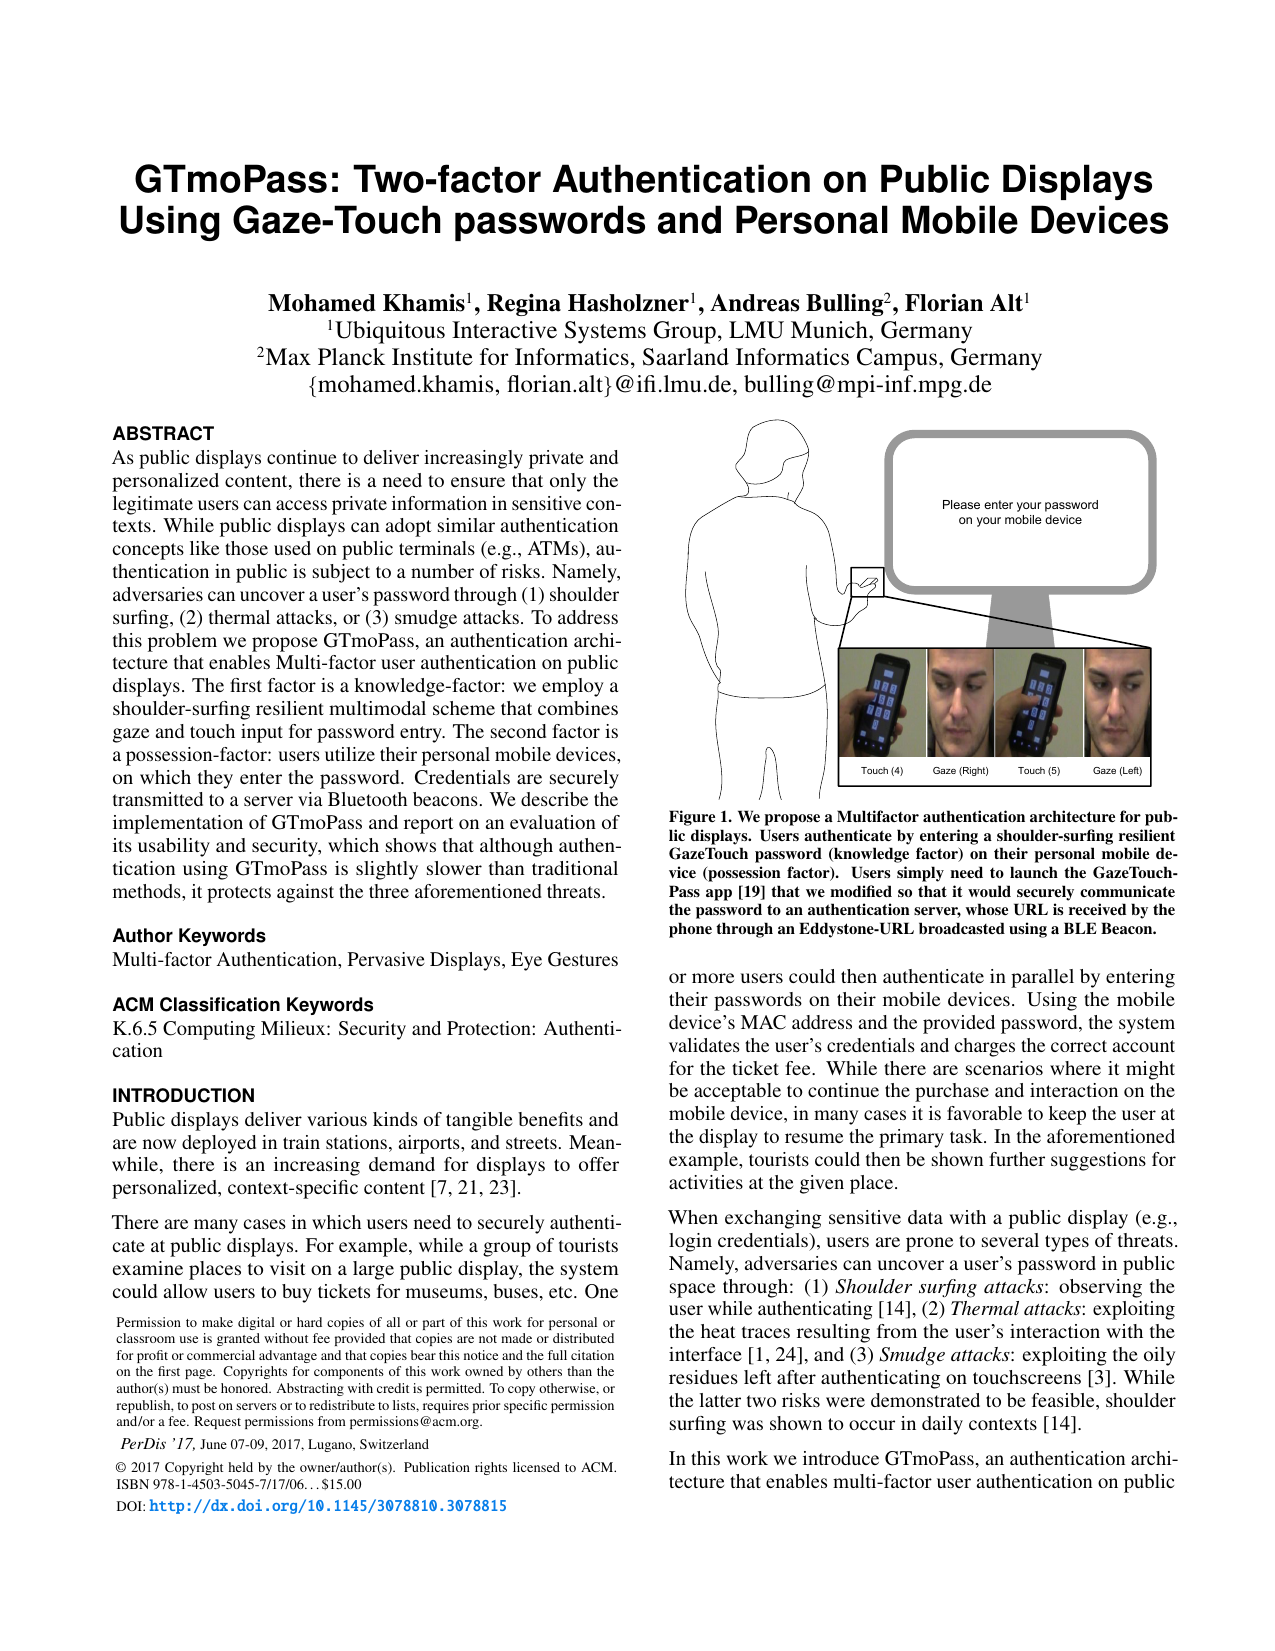 GTmoPass: Two-factor Authentication on Public Displays Using GazeTouch passwords and Personal Mobile Devices